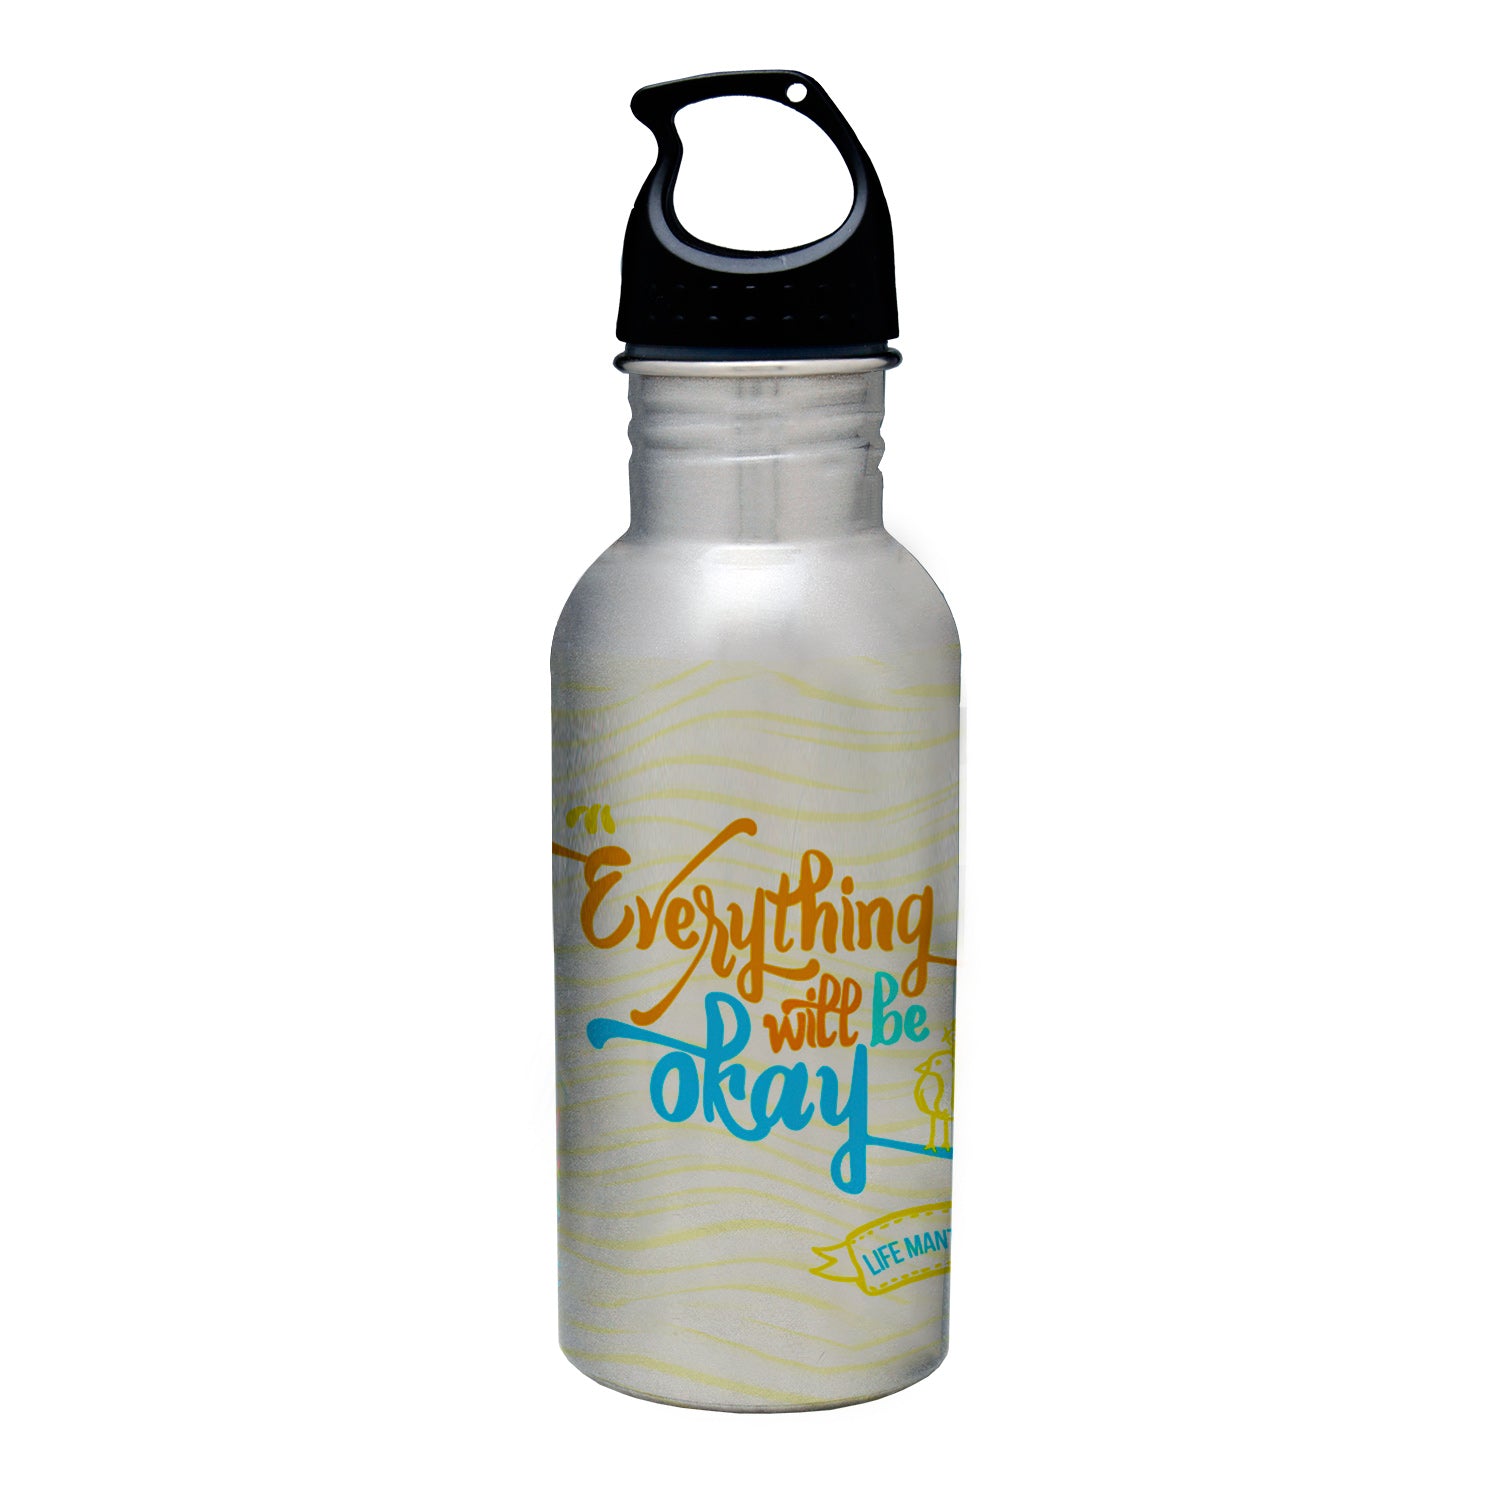 Everything will be okay - Use Your Own Bottle